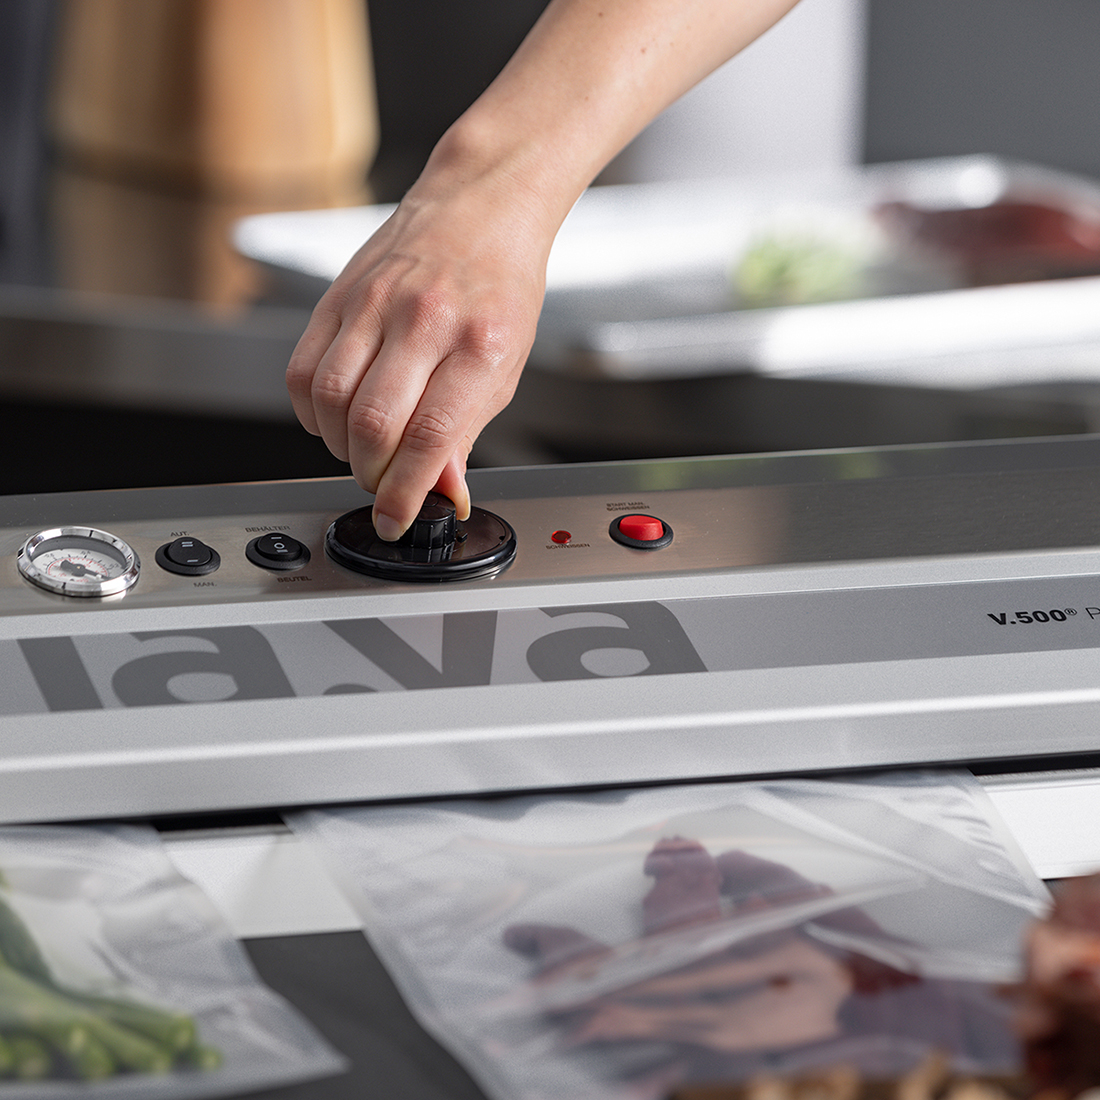 V.500 Premium vacuum sealer during the vacuum sealing process, with one hand operating the pressure control